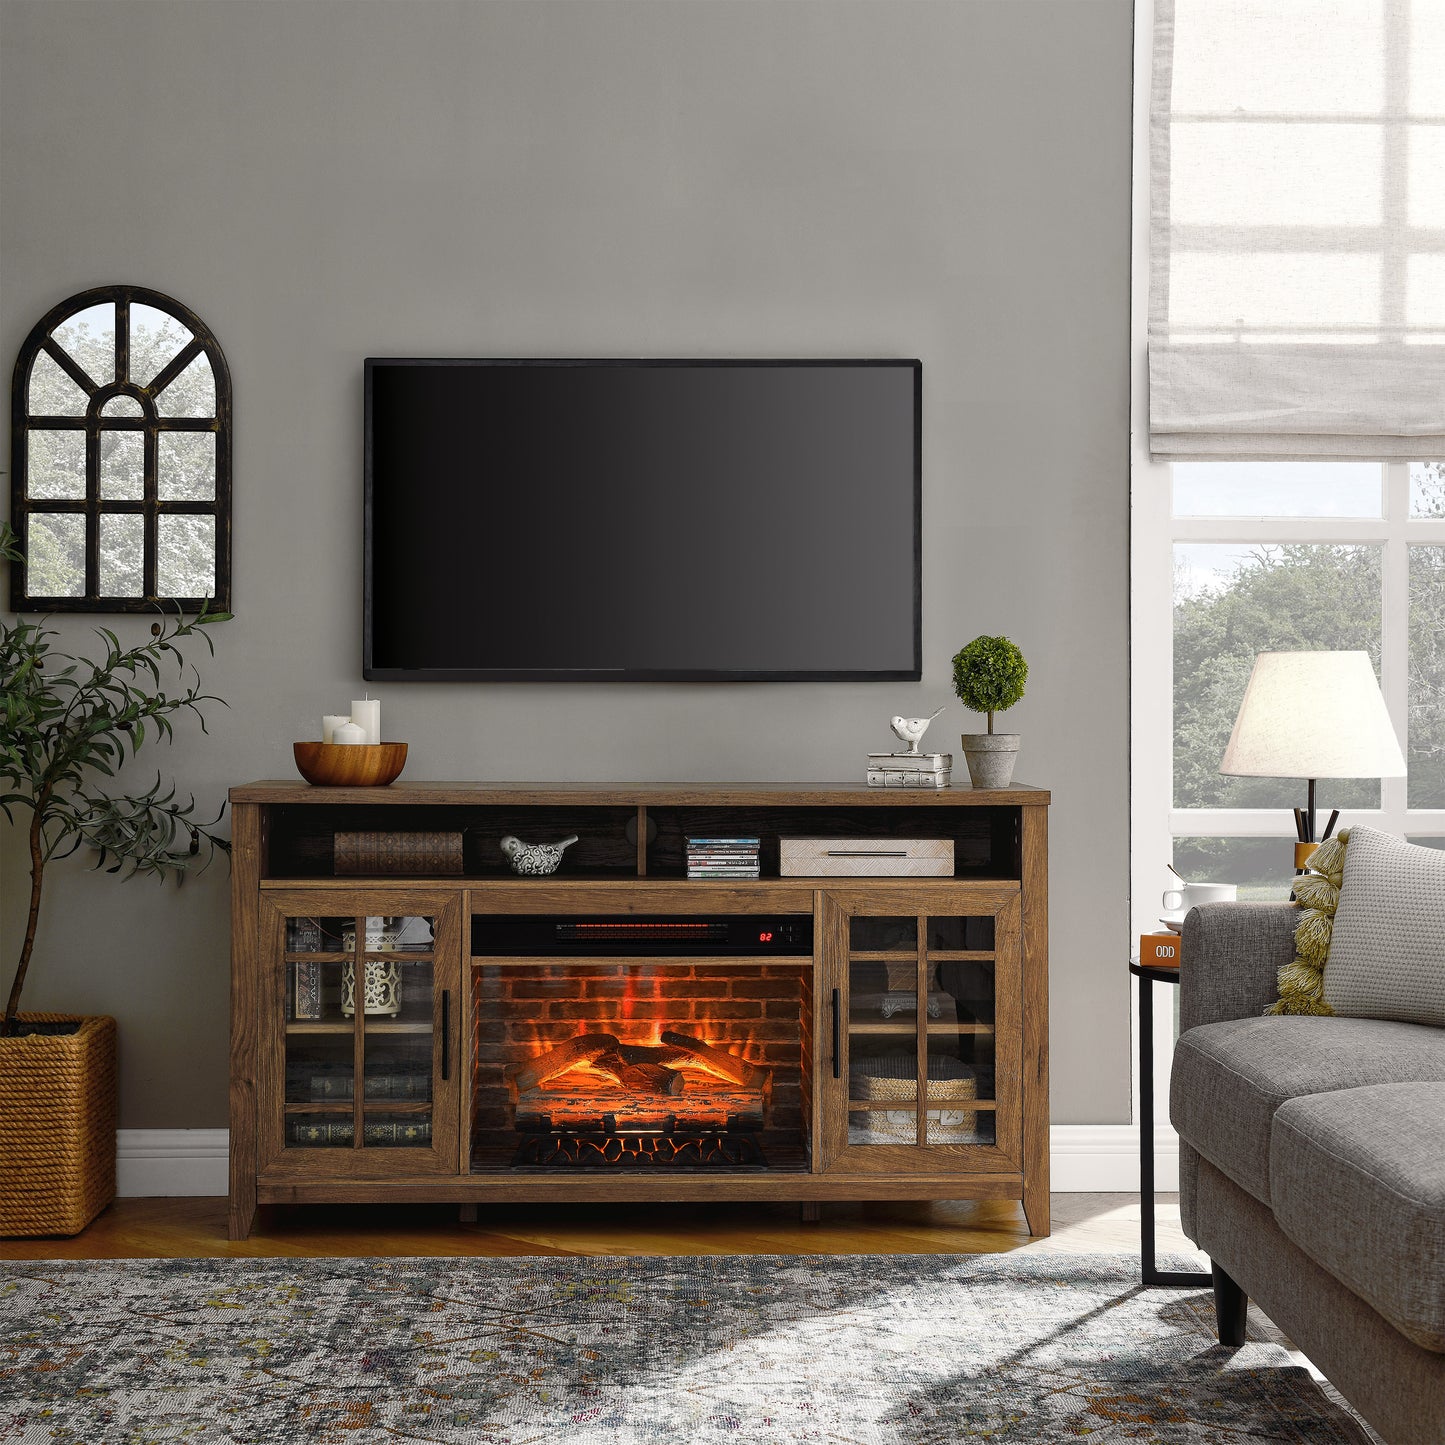 55 inch TV Media Stand with Electric Fireplace - Reclaimed Barnwood Color